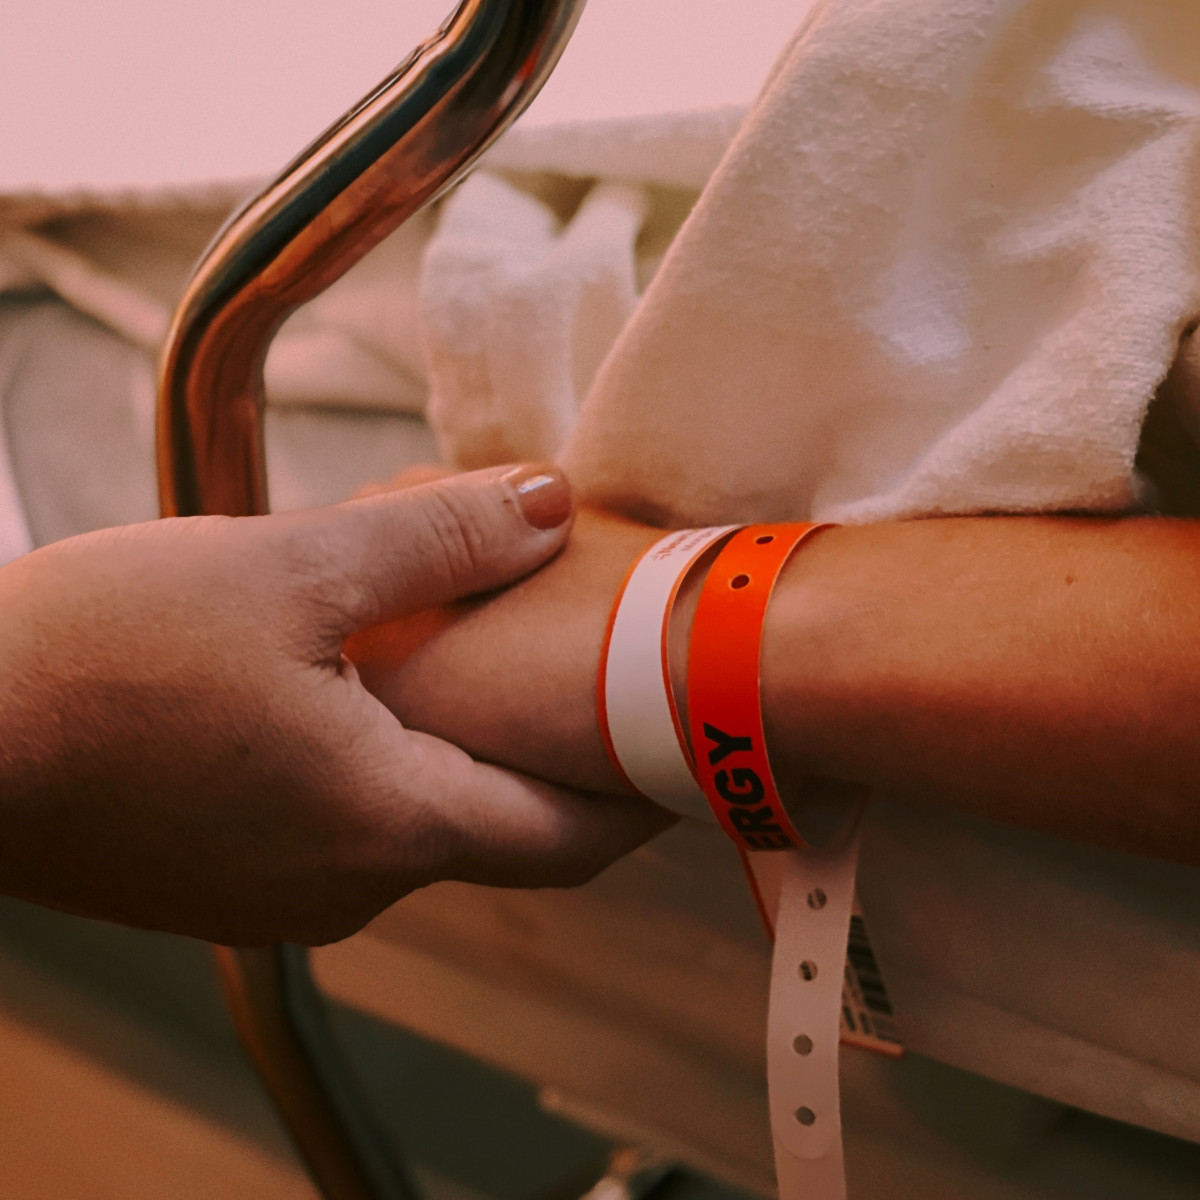 A person holding the hand of someone in hospital